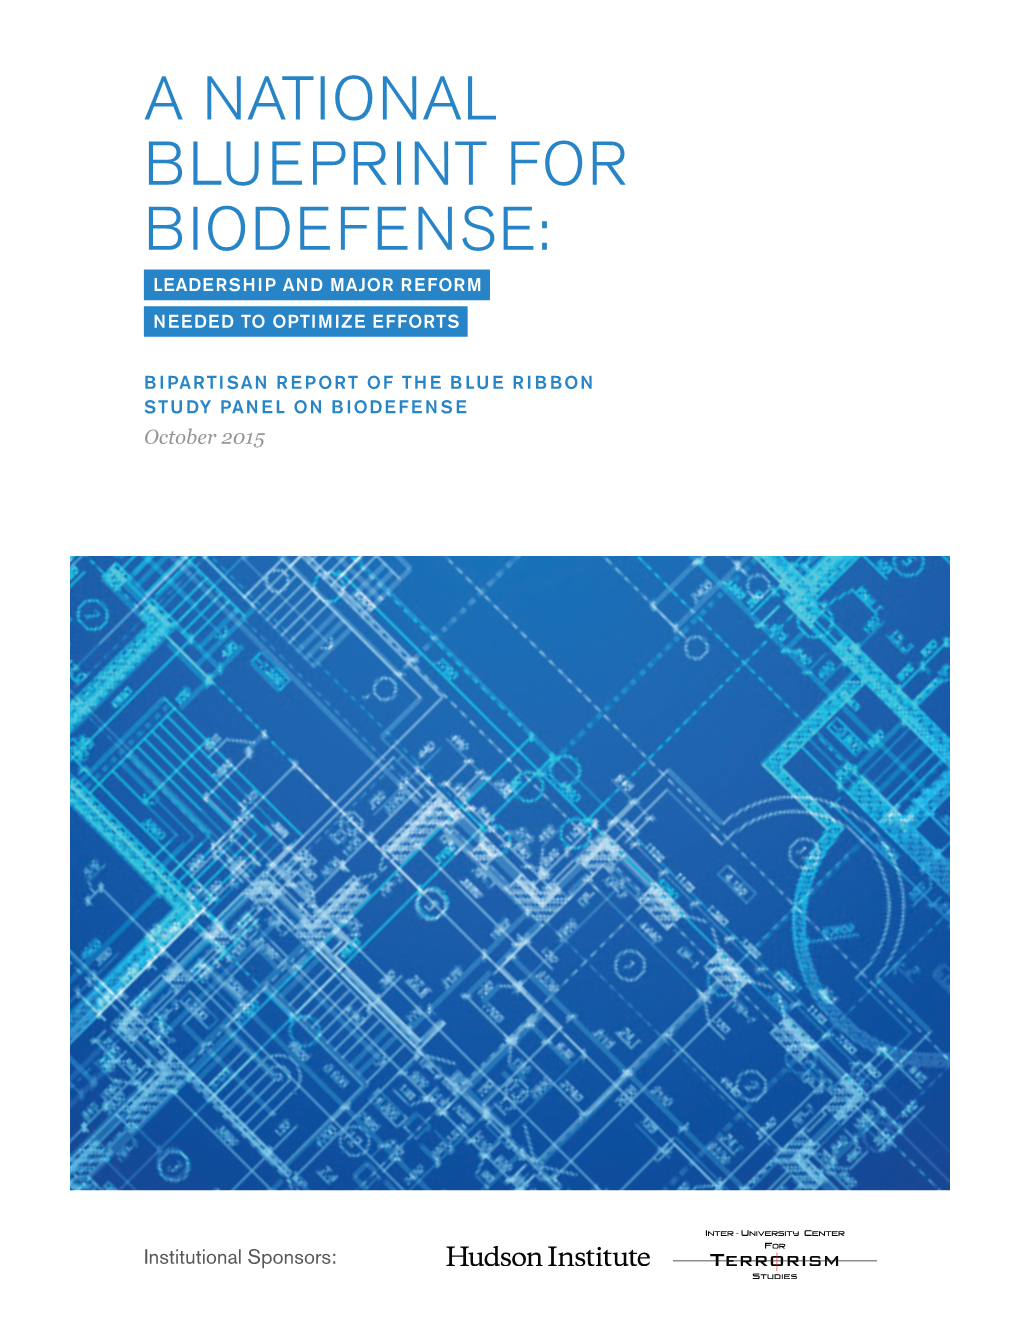 A National Blueprint for Biodefense: Leadership and Major Reform Needed to Optimize Efforts